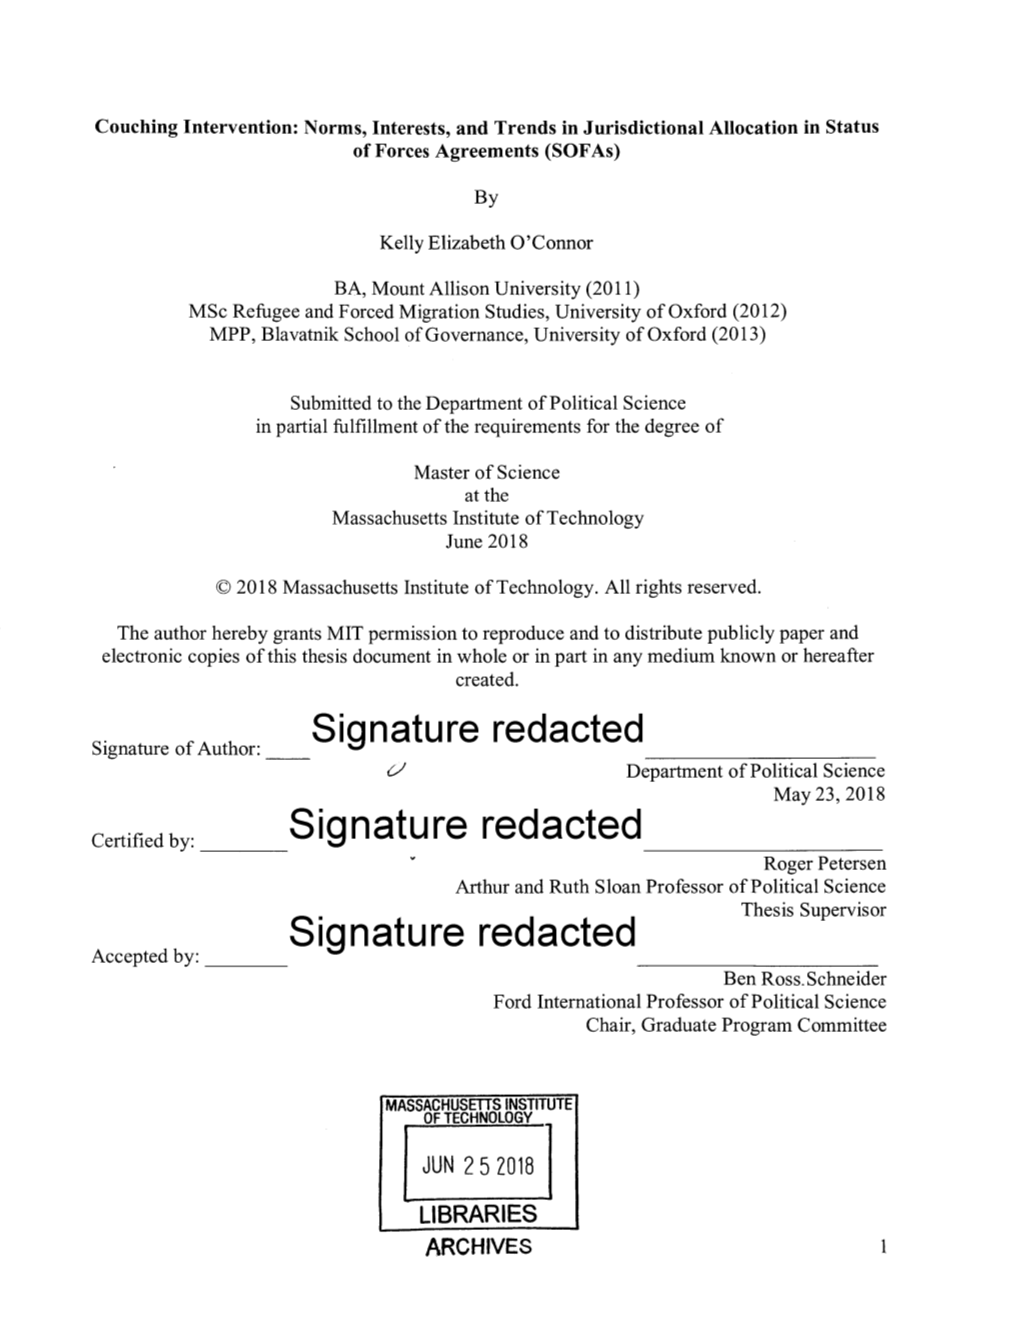 Signature Redacted 6-' Department of Political Science May 23, 2018